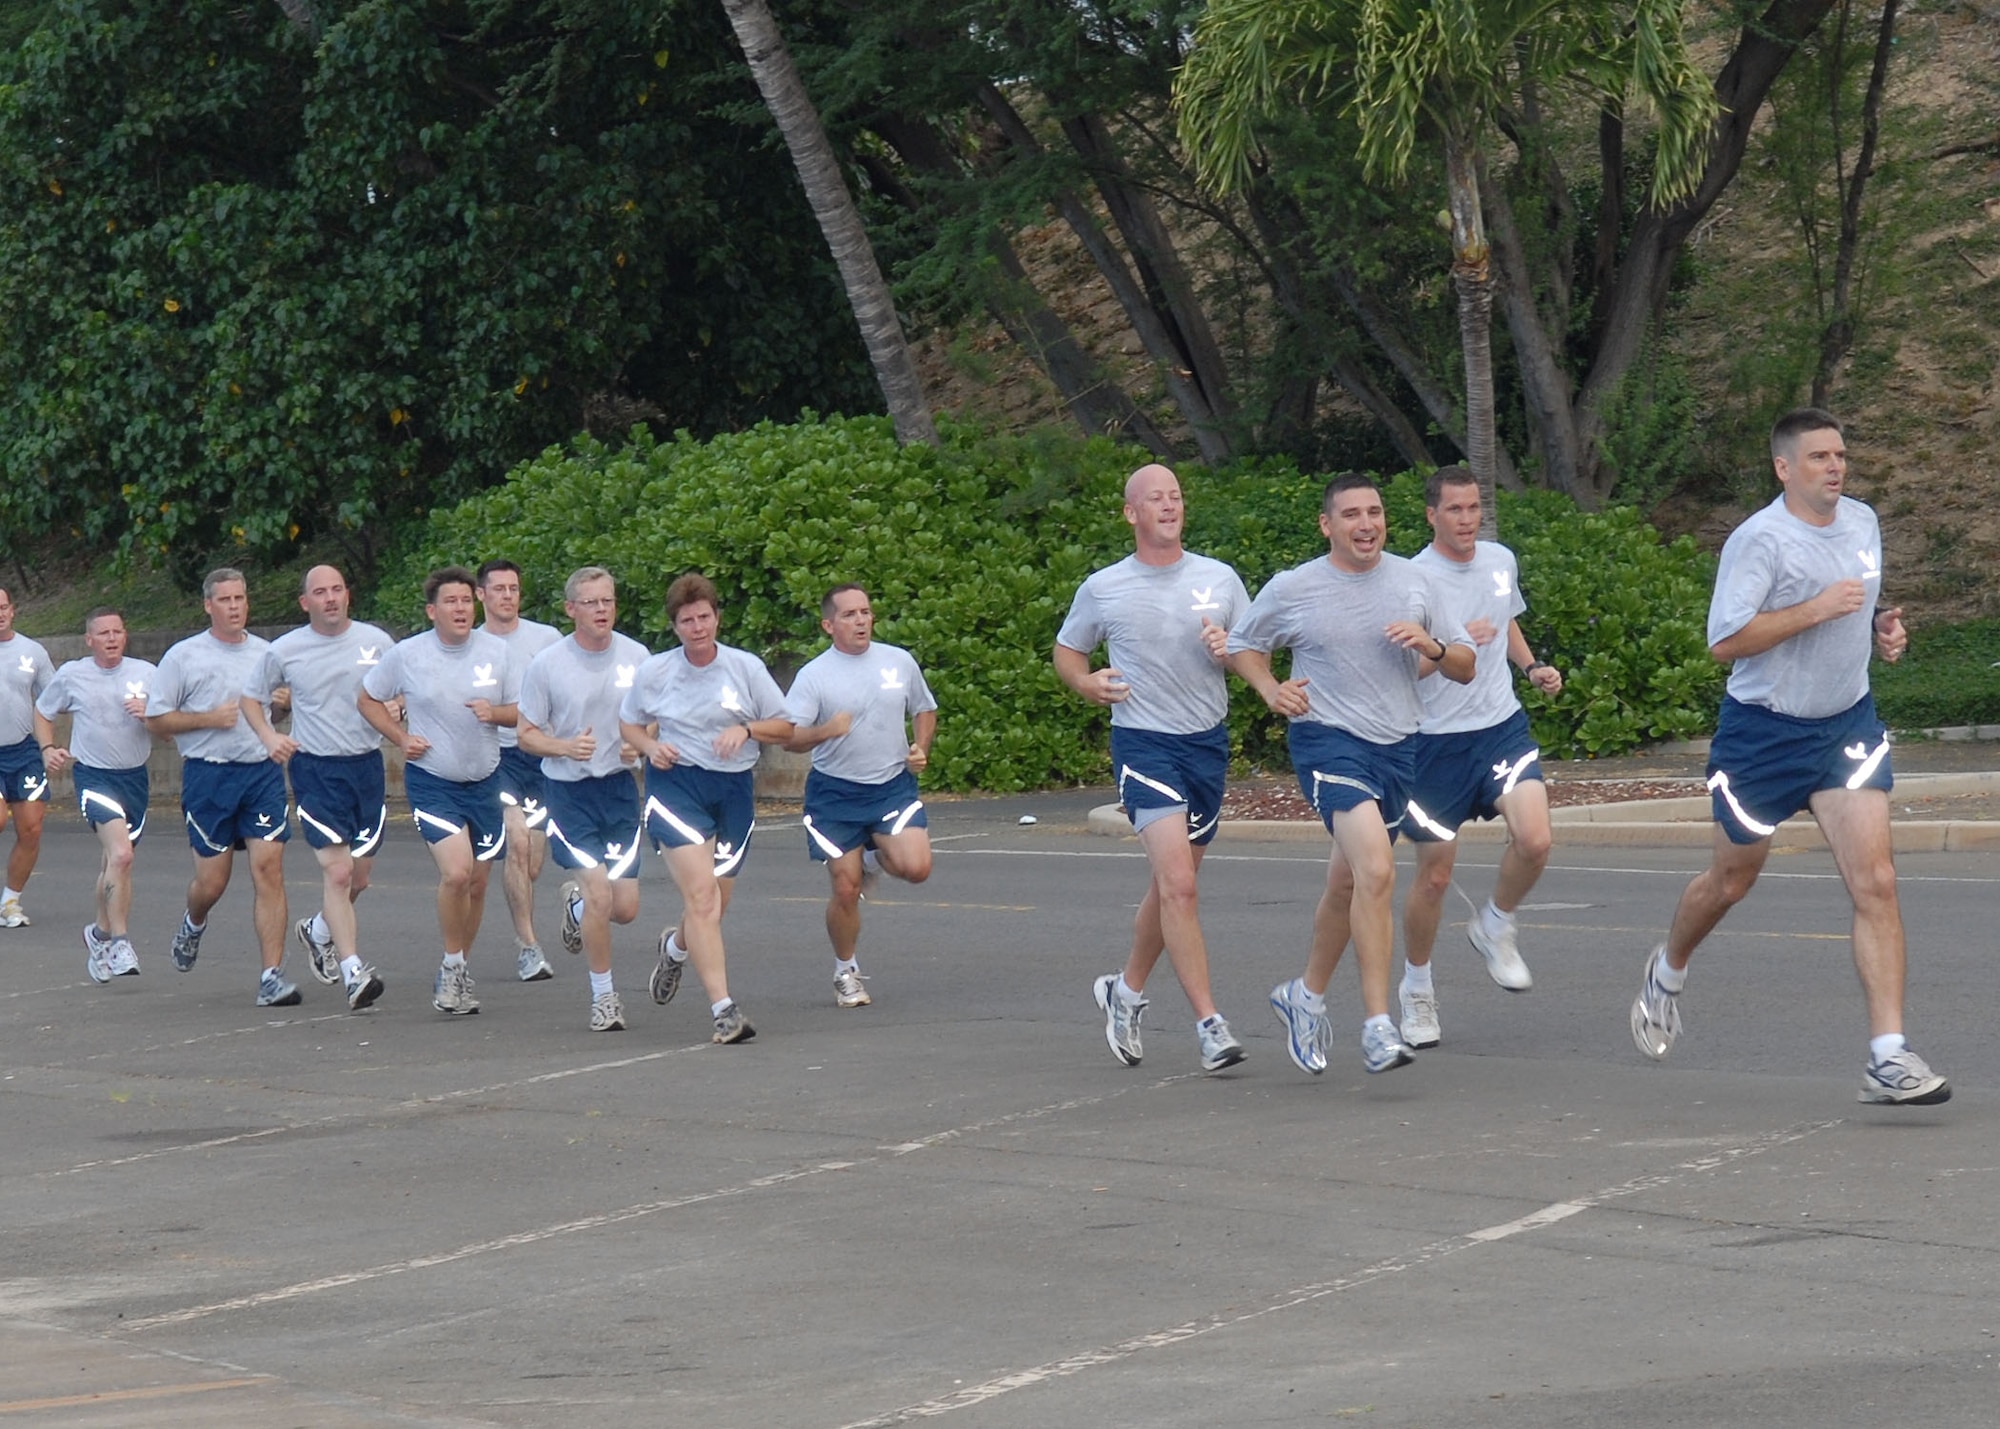 Members of Pacific Air Forces’ A-staff run in formation at Hickam Air Force Base, Hawaii, May 27 during a morning “beach PT session.”  Approximately 70 people participated in the physical training session, which included a 1.5-mile run to Hickam Beach, a half-hour session of calisthenics and team building, followed by a 1.5-mile run back to the starting point. The directorates participating in the beach session were A3, A4, A5 and A8. (U.S. Air Force photo/Tech. Sgt. Jerome Tayborn)